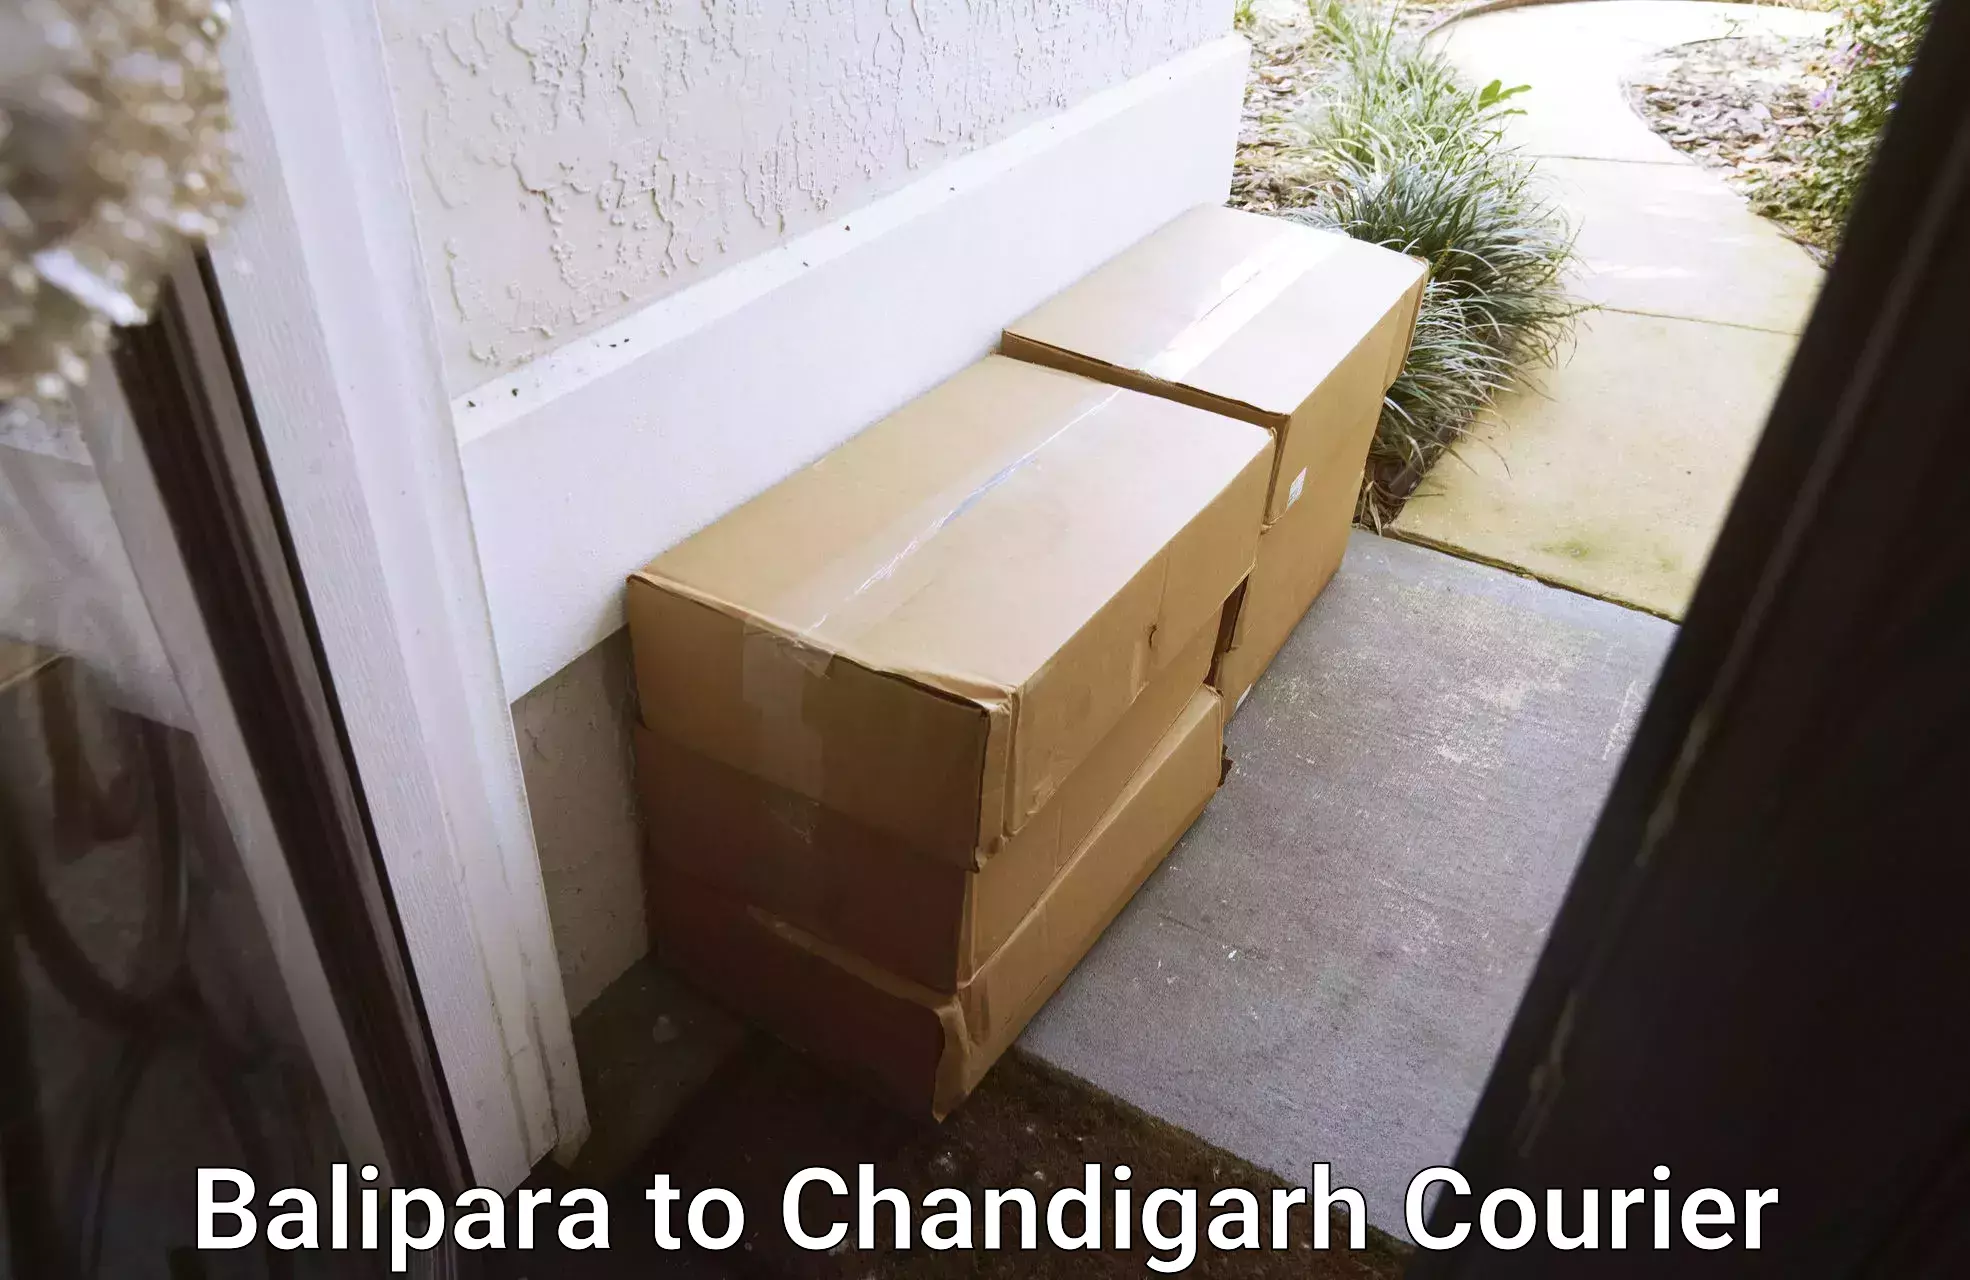 Streamlined delivery processes Balipara to Chandigarh